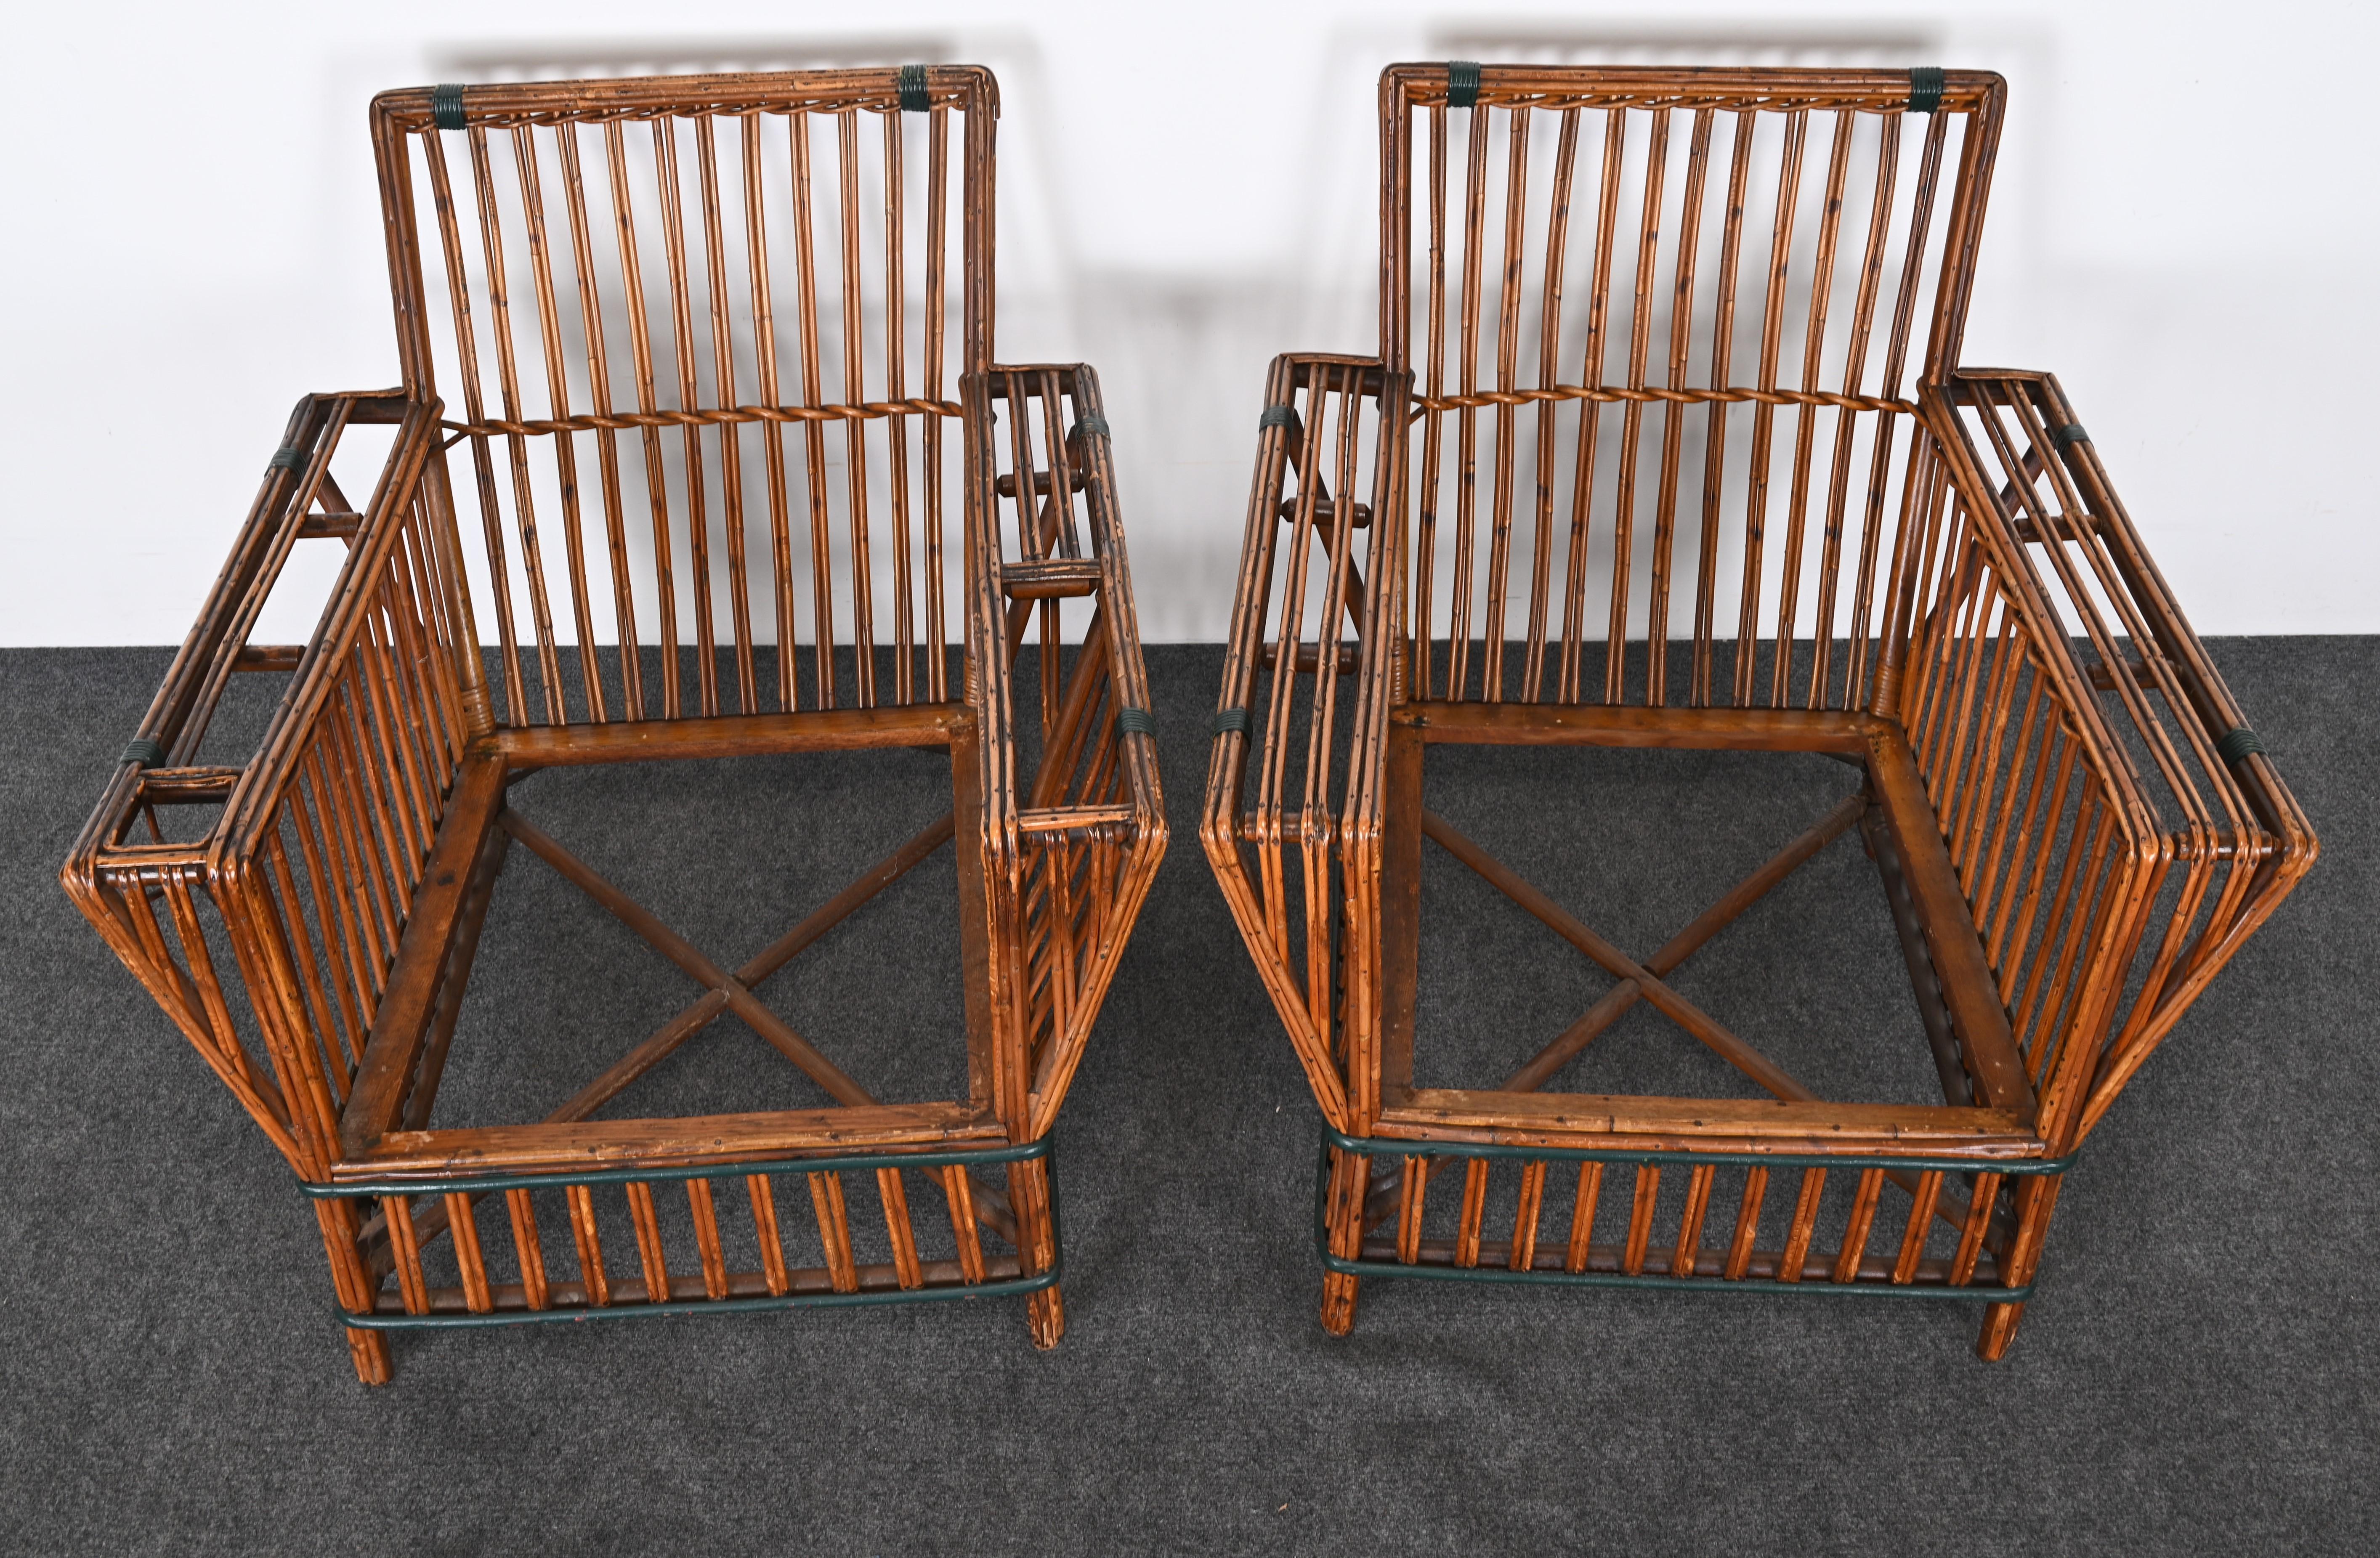 Art Deco Split Ypsilanti Stick Reed Wicker or Sofa with Pair Arm Chairs c. 1930s For Sale 2